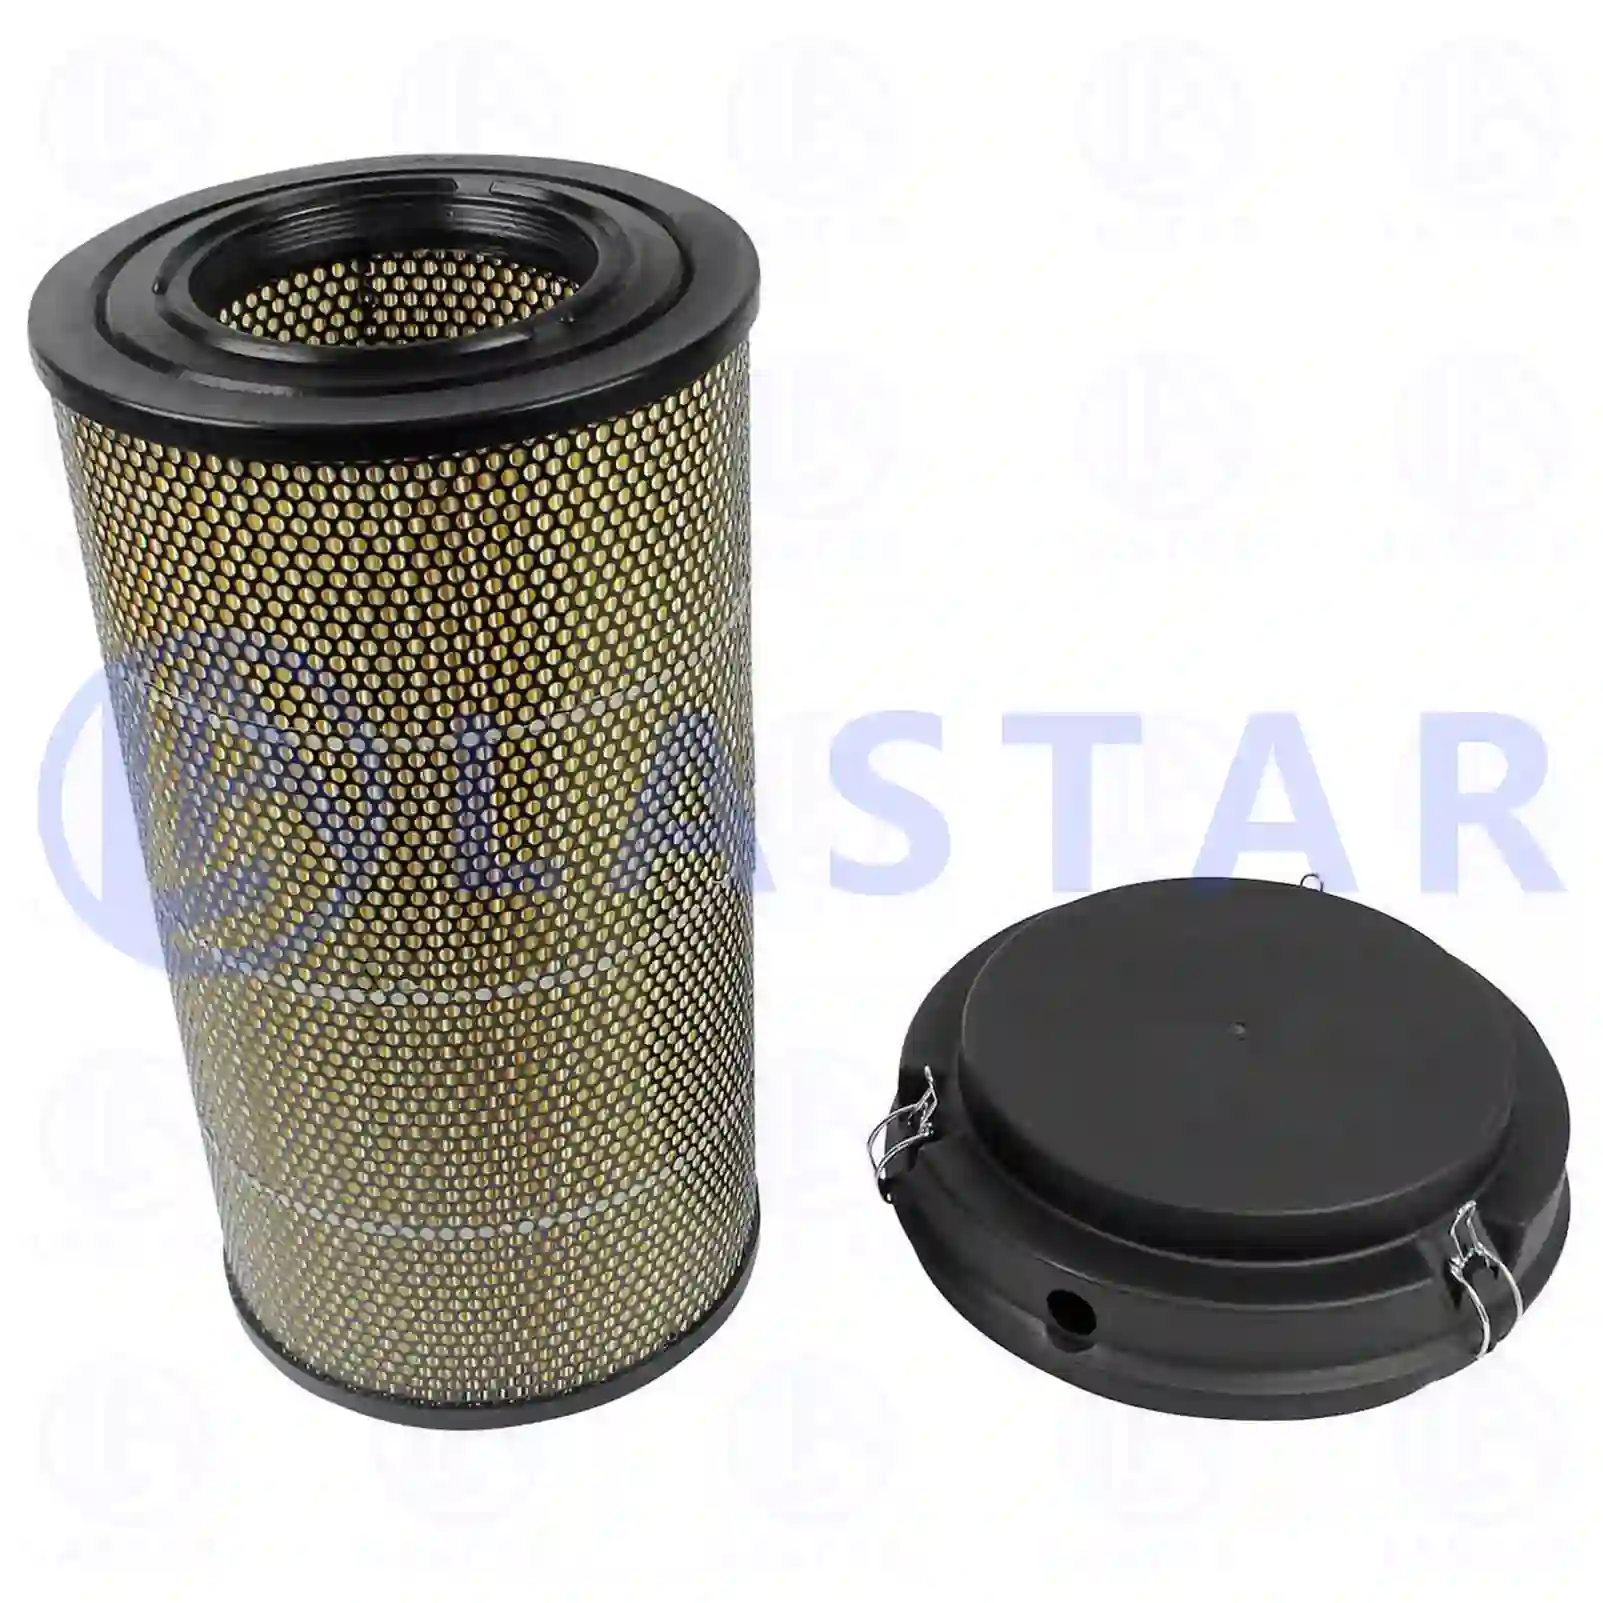 Air filter, with cover, 77706551, 1534331, 1854407, 1931681G, 1931685, ZG00907-0008 ||  77706551 Lastar Spare Part | Truck Spare Parts, Auotomotive Spare Parts Air filter, with cover, 77706551, 1534331, 1854407, 1931681G, 1931685, ZG00907-0008 ||  77706551 Lastar Spare Part | Truck Spare Parts, Auotomotive Spare Parts